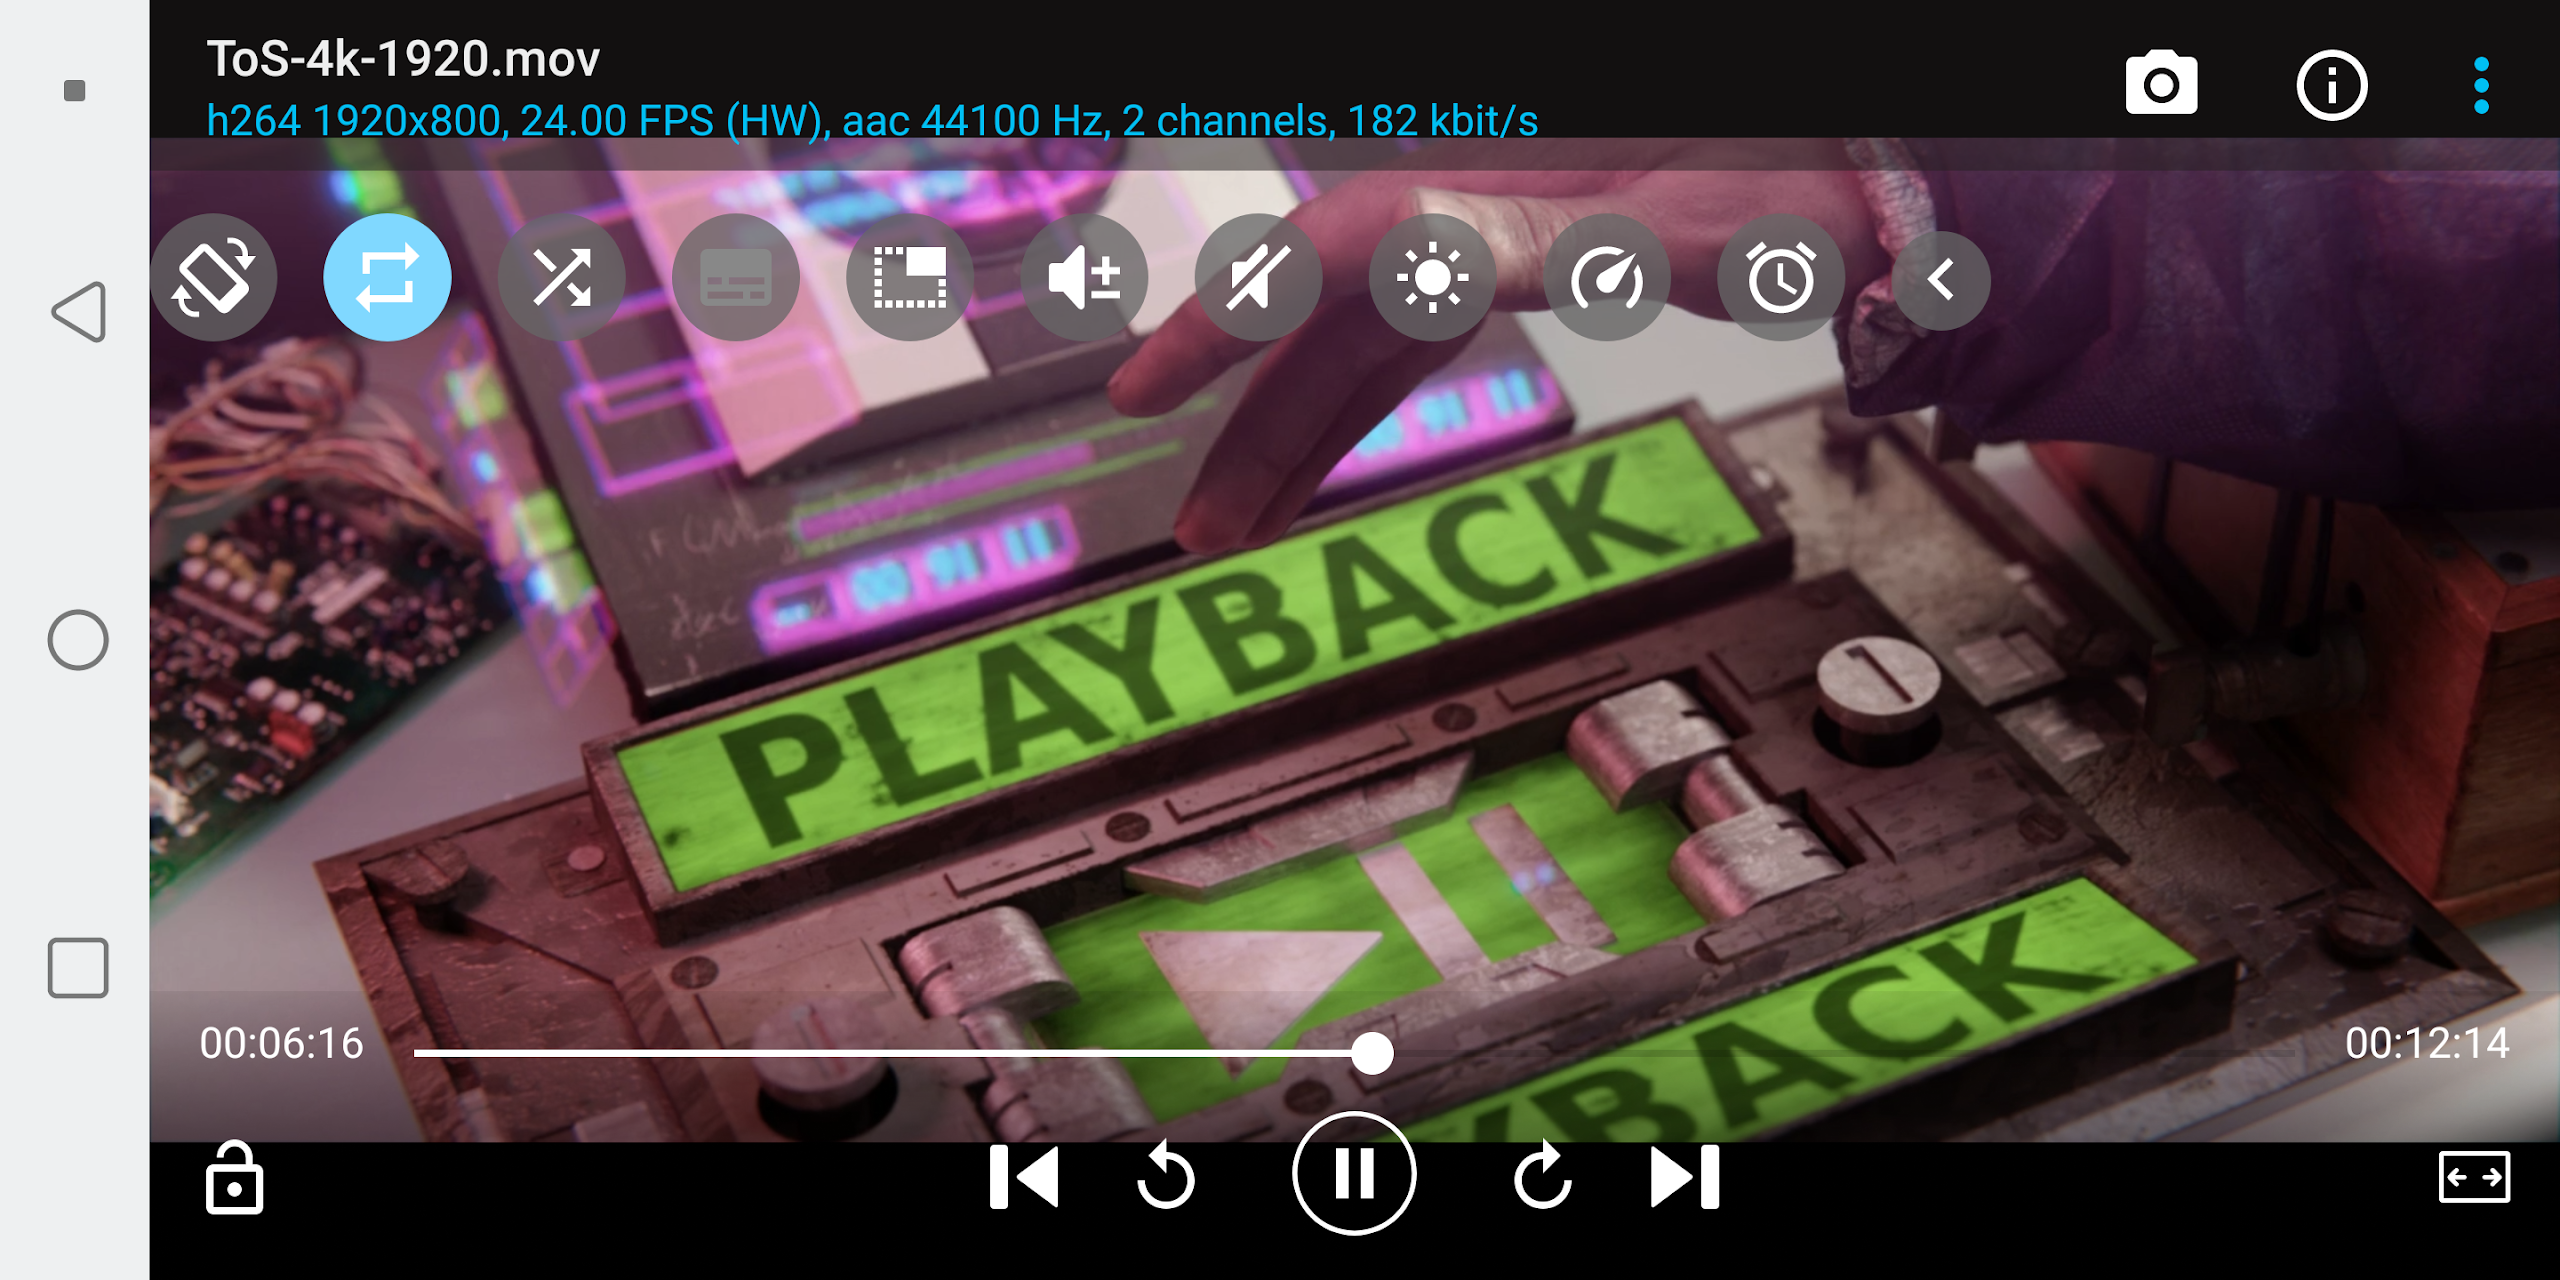 BSPlayer 3.18.242 without watermark APK for Android - Latest Version 2022
